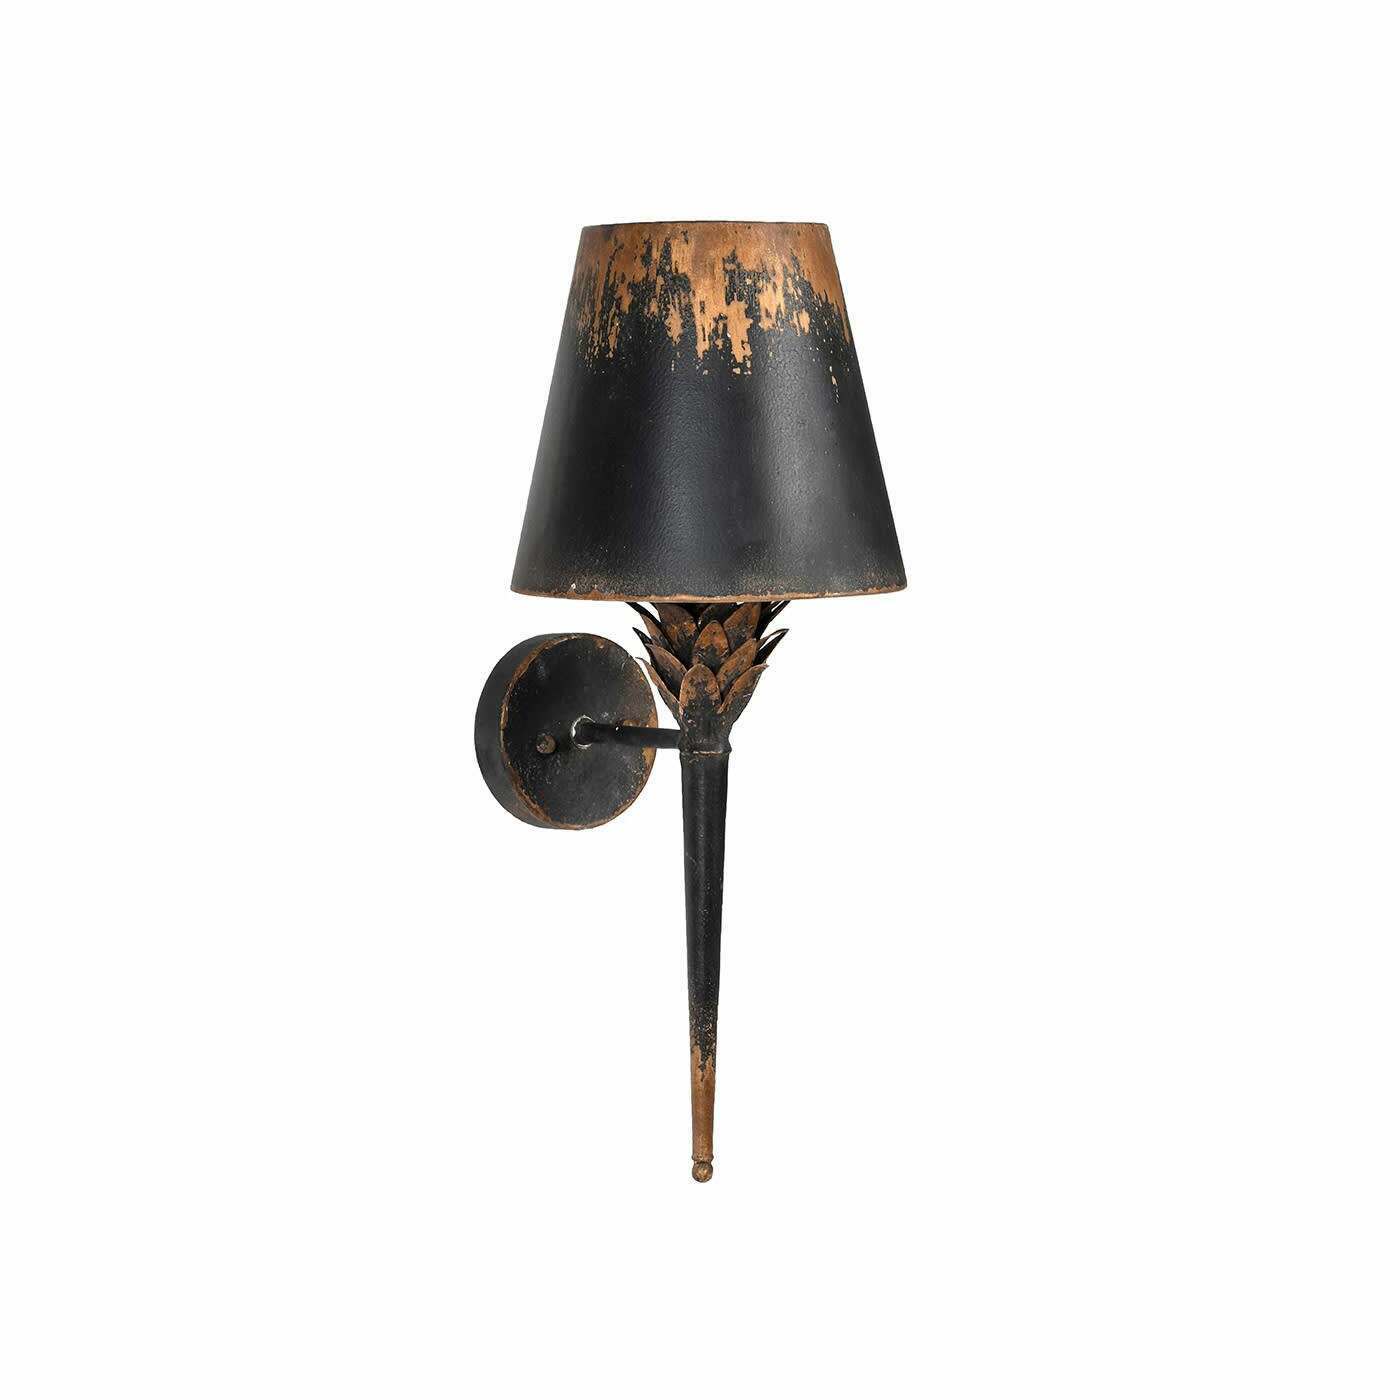 Read more about Graham and green distressed iron wall light